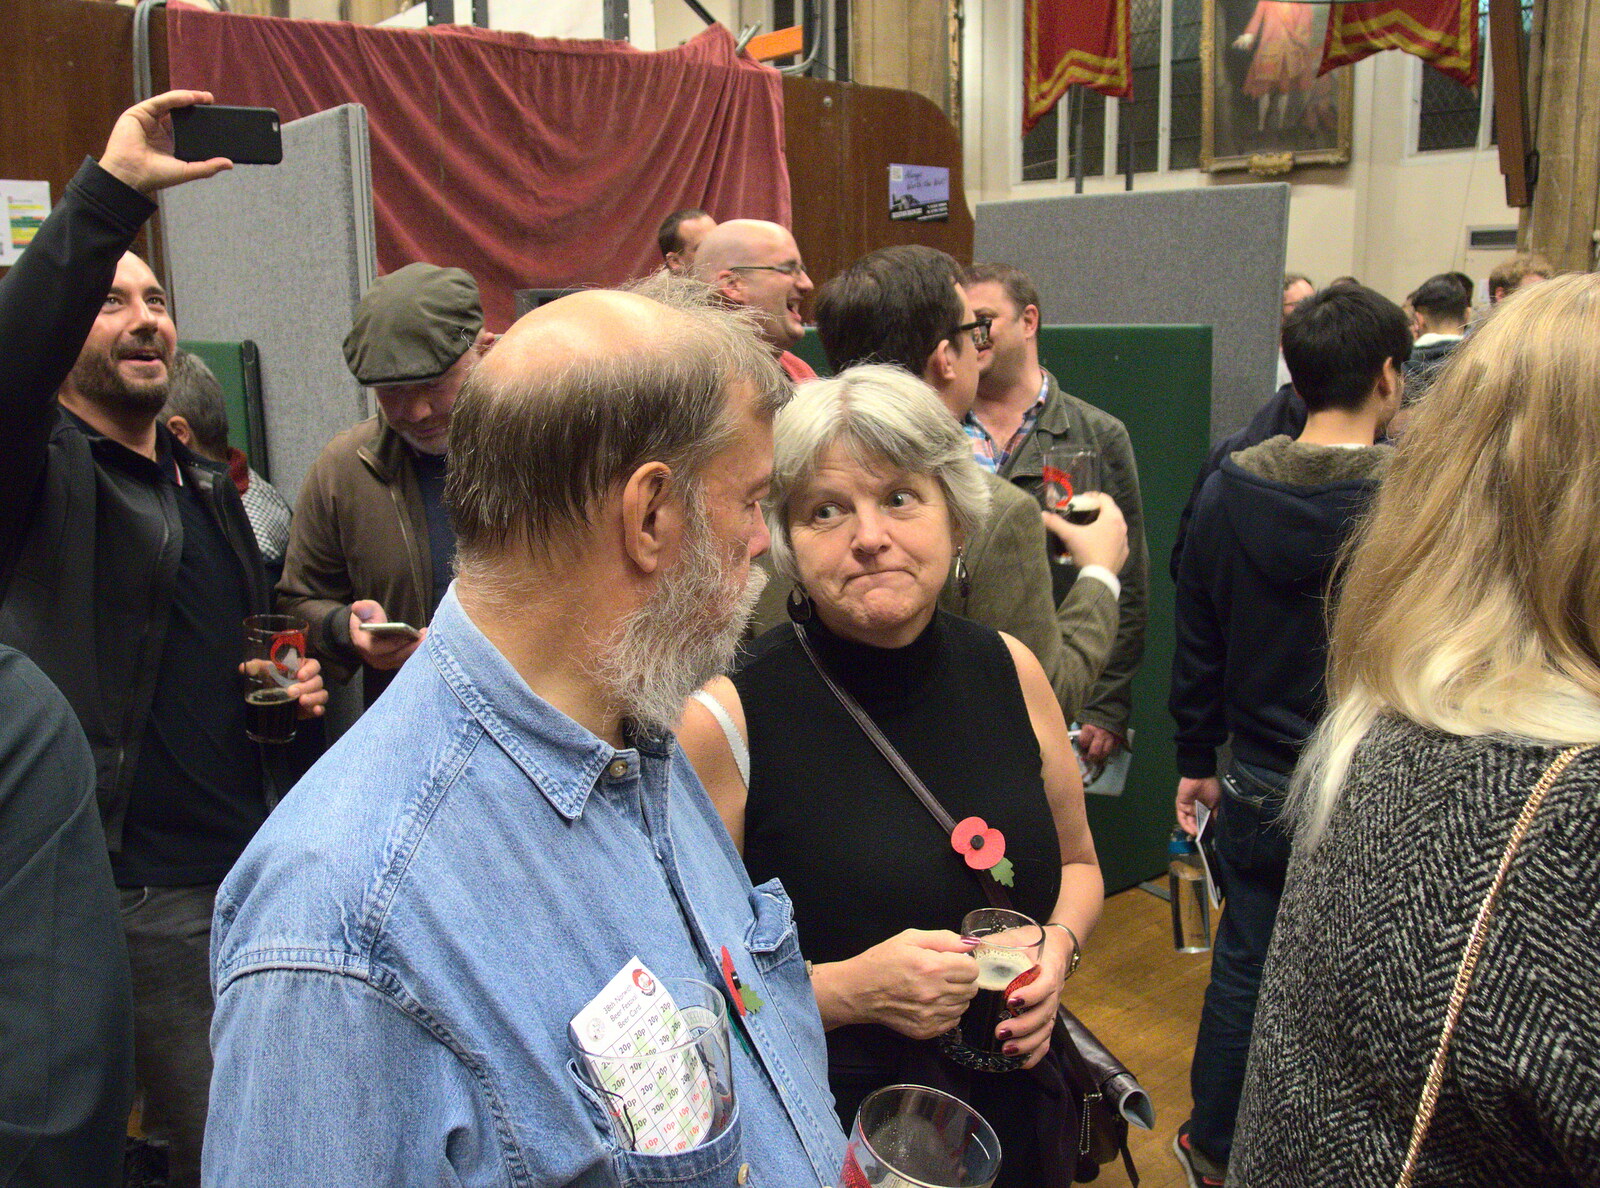 Gloria looks non-plussed from The 38th Norwich Beer Festival, Norwich, Norfolk - 28th October 2015